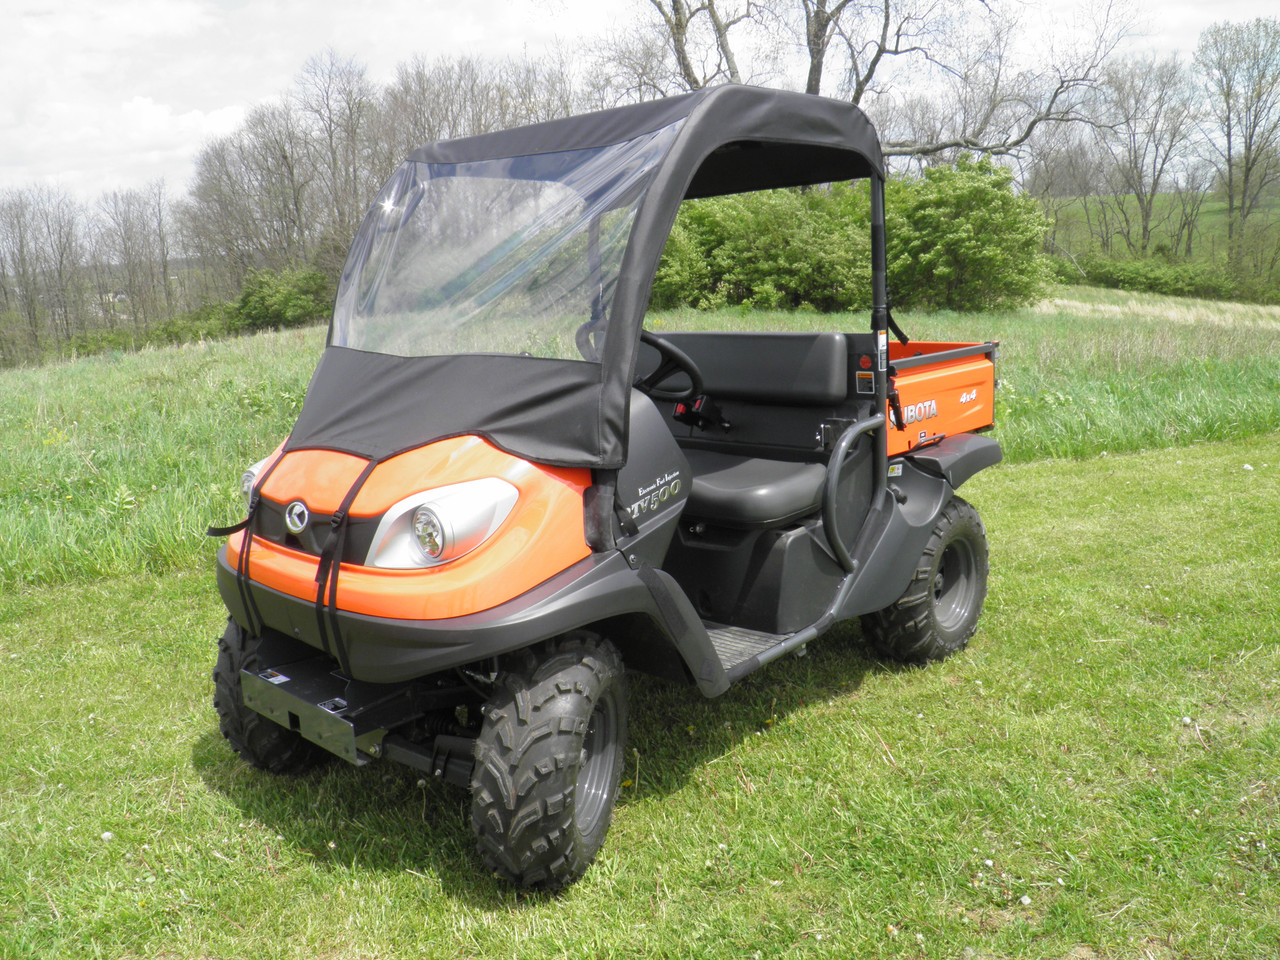 3 Star side x side Kubota RTV 400/500/520 vinyl windshield and top side and front angle view